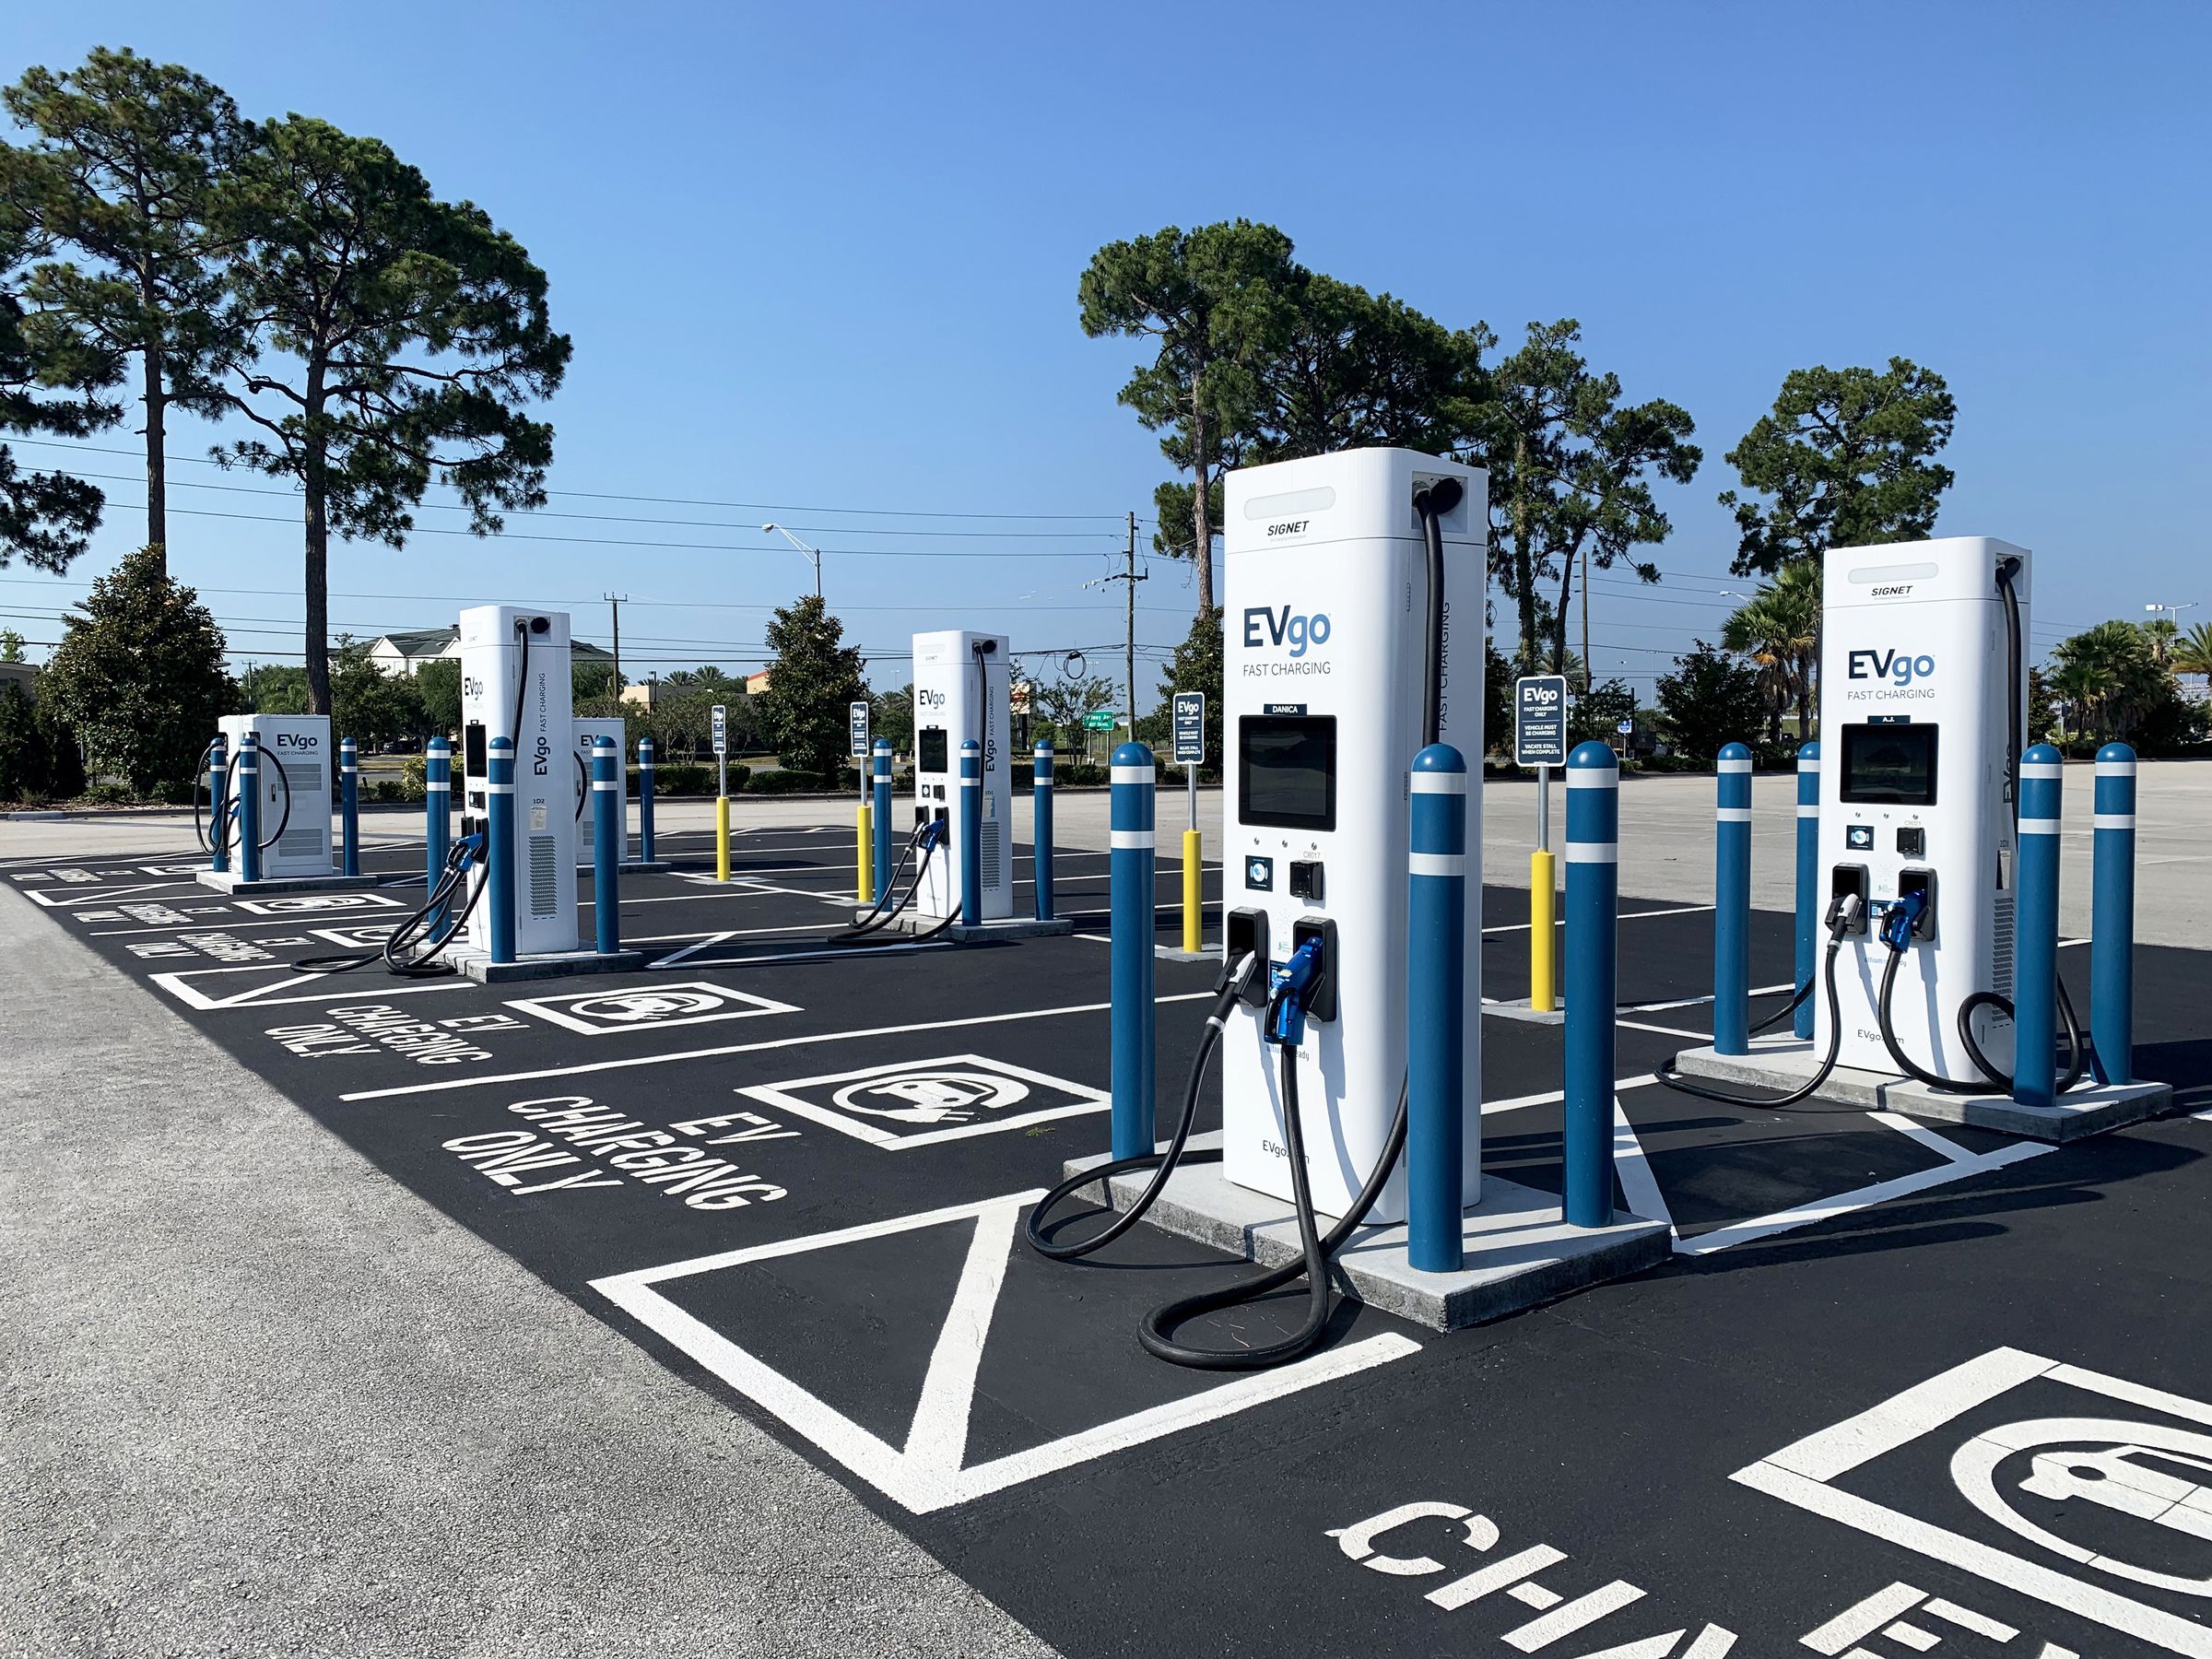 Newer EVgo charging station models — some still include CHAdeMO for Nissan Leaf compatibility.